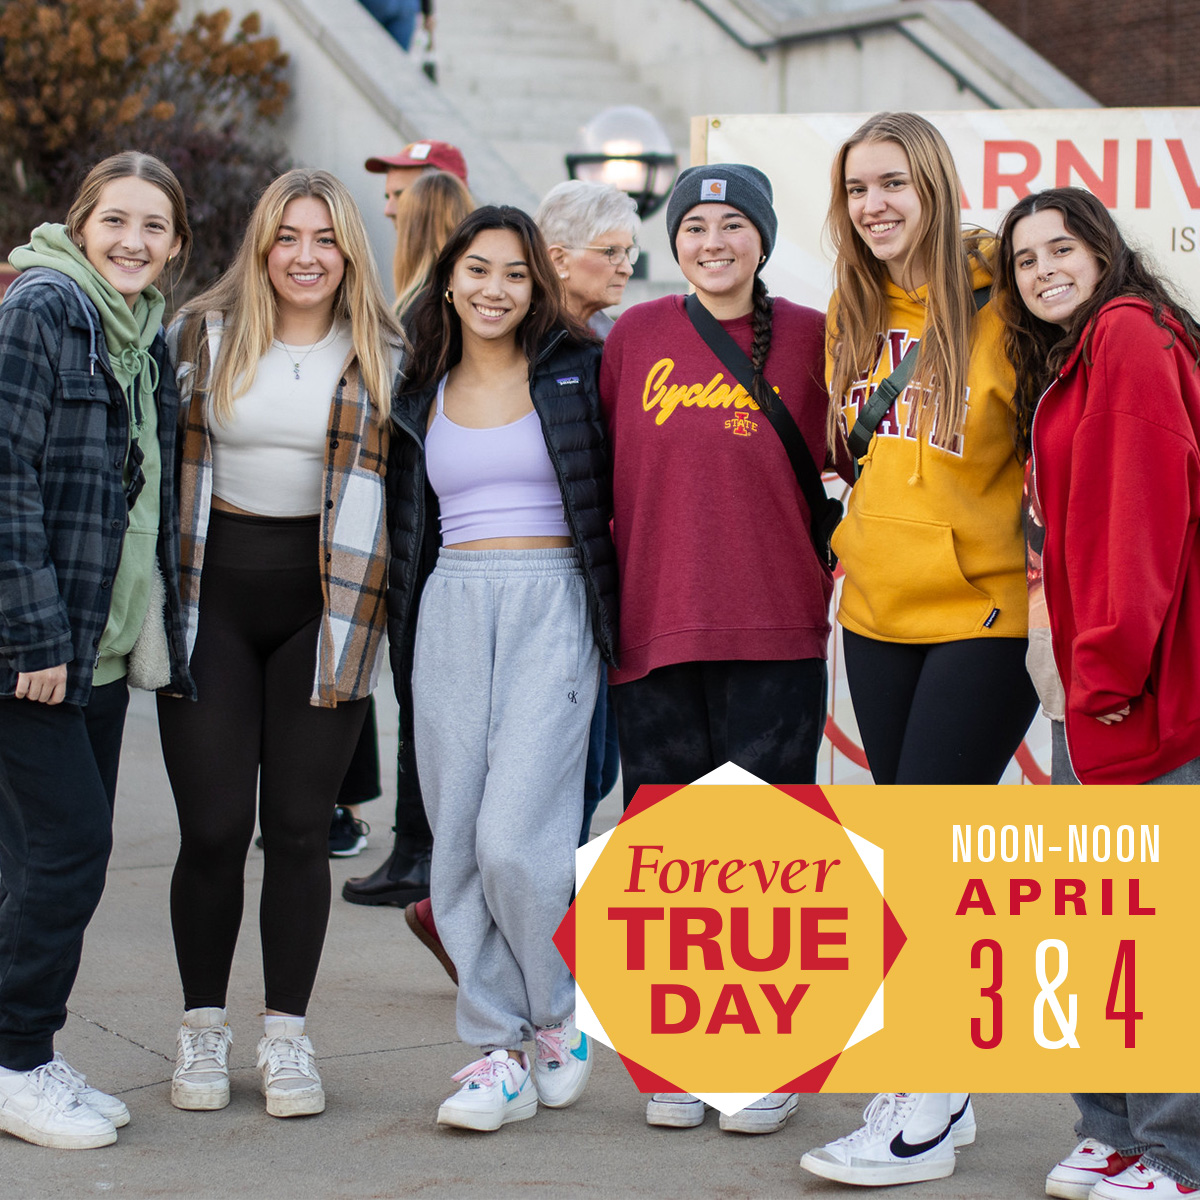 Forever True Day ends at noon! Your gift supports more than 5,090 students through the Future Alumni Network, providing opportunities to engage with fellow Cyclones on campus and network with alumni anywhere using career services. 𝗠𝗔𝗞𝗘 𝗔 𝗚𝗜𝗙𝗧 ➡️ forevertrueday.com/alumni